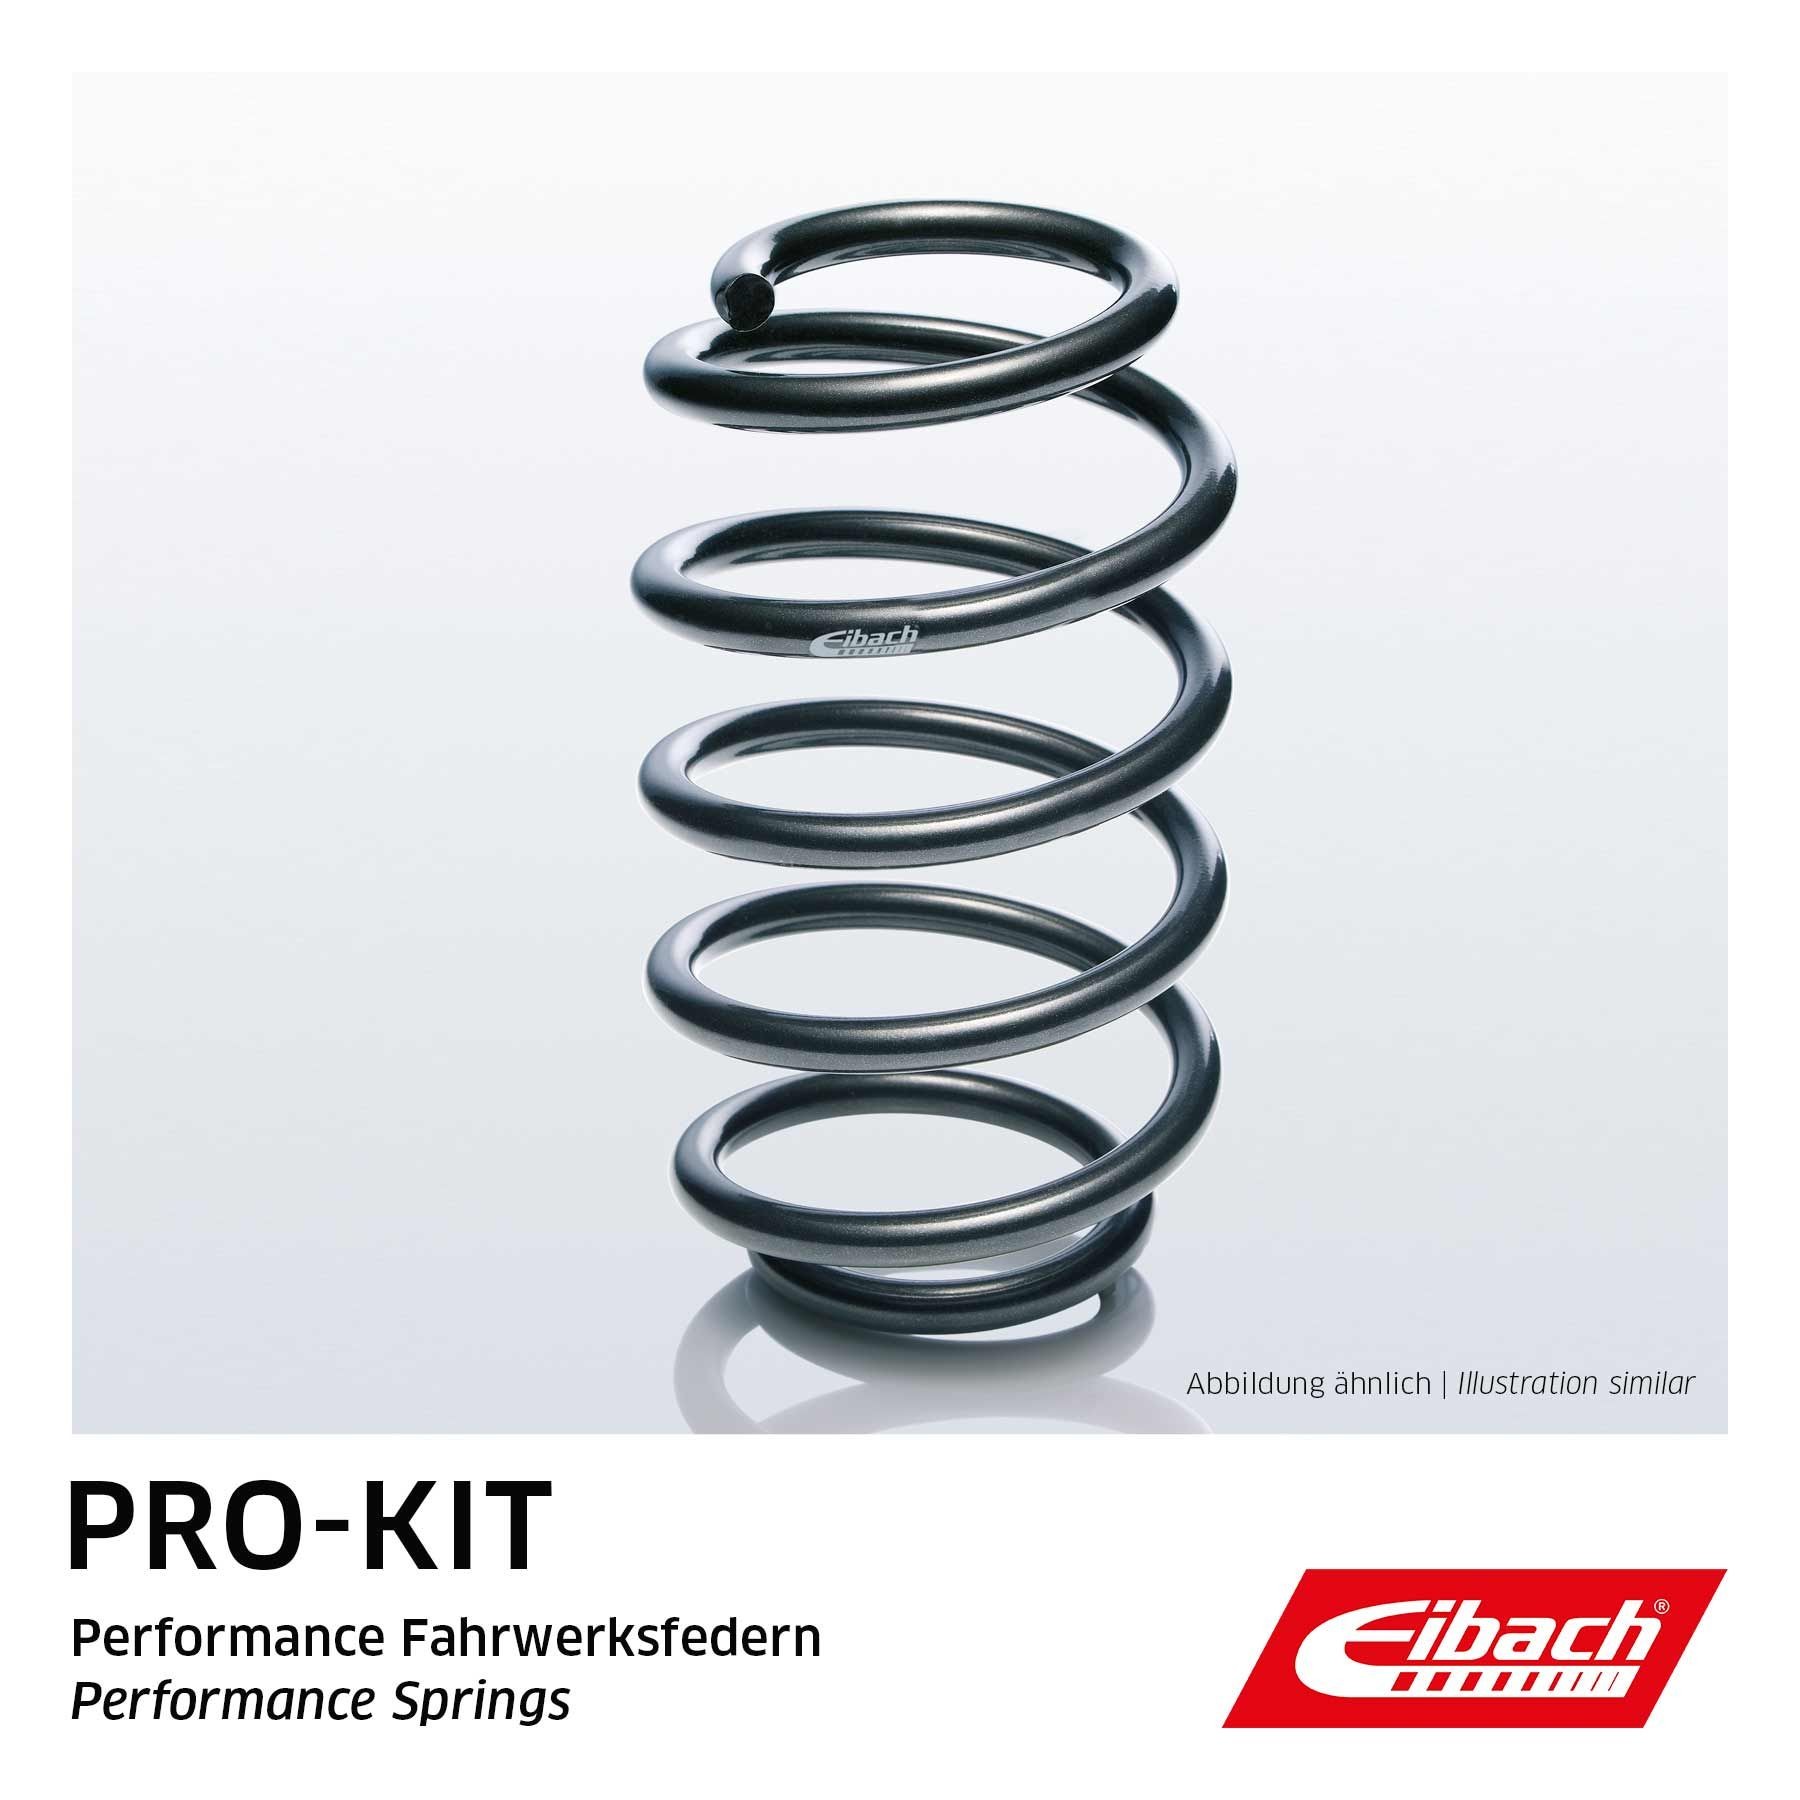 111502102 EIBACH Single Spring Pro-Kit Front Axle, Coil Spring, for vehicles with sports suspension Length: 254mm Spring F11-15-021-02-VA buy